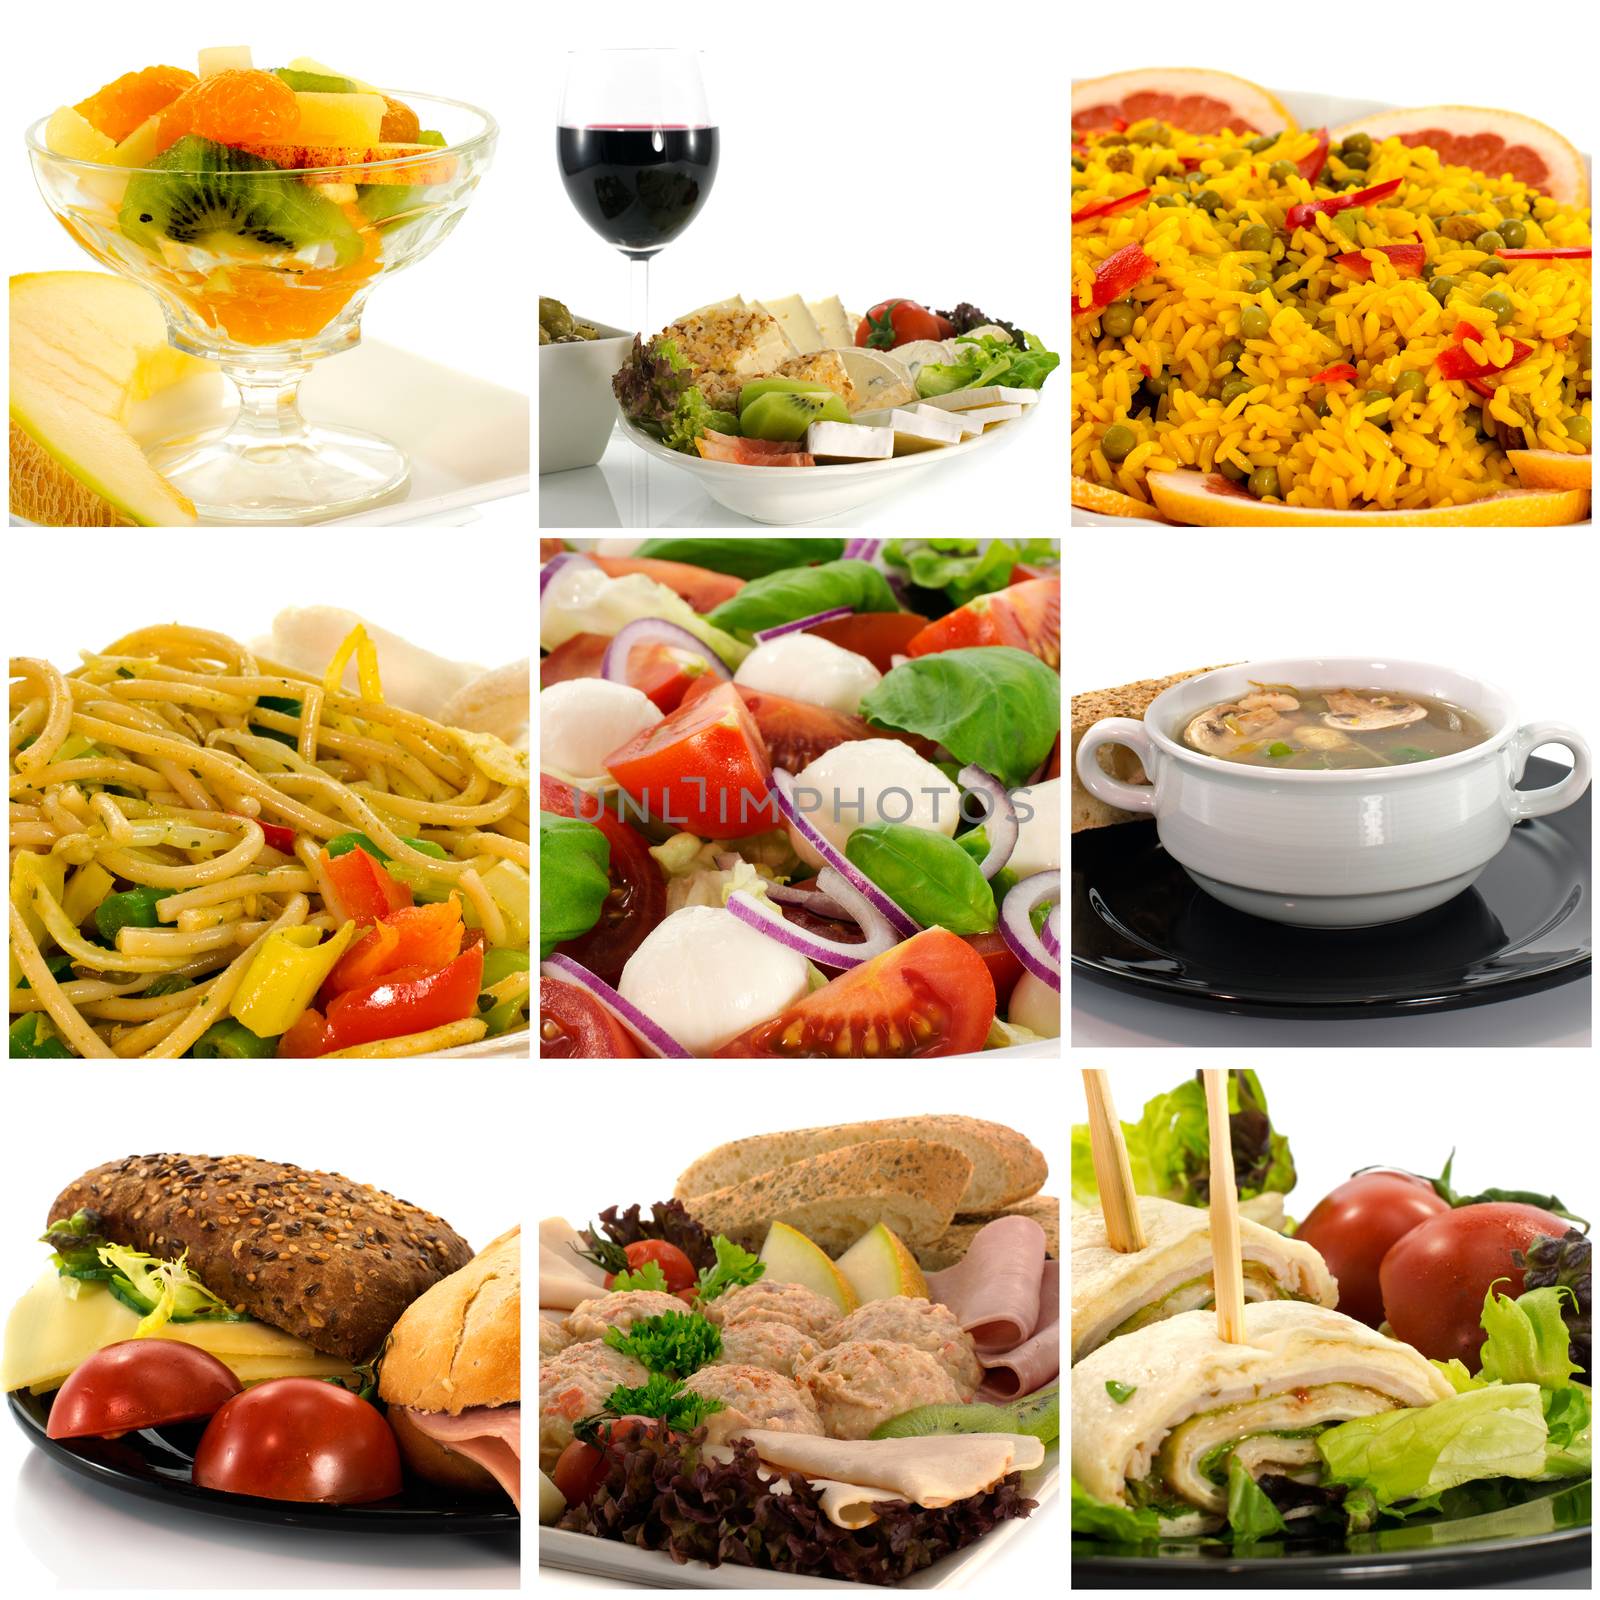 diversity of lunch diner and other meal products